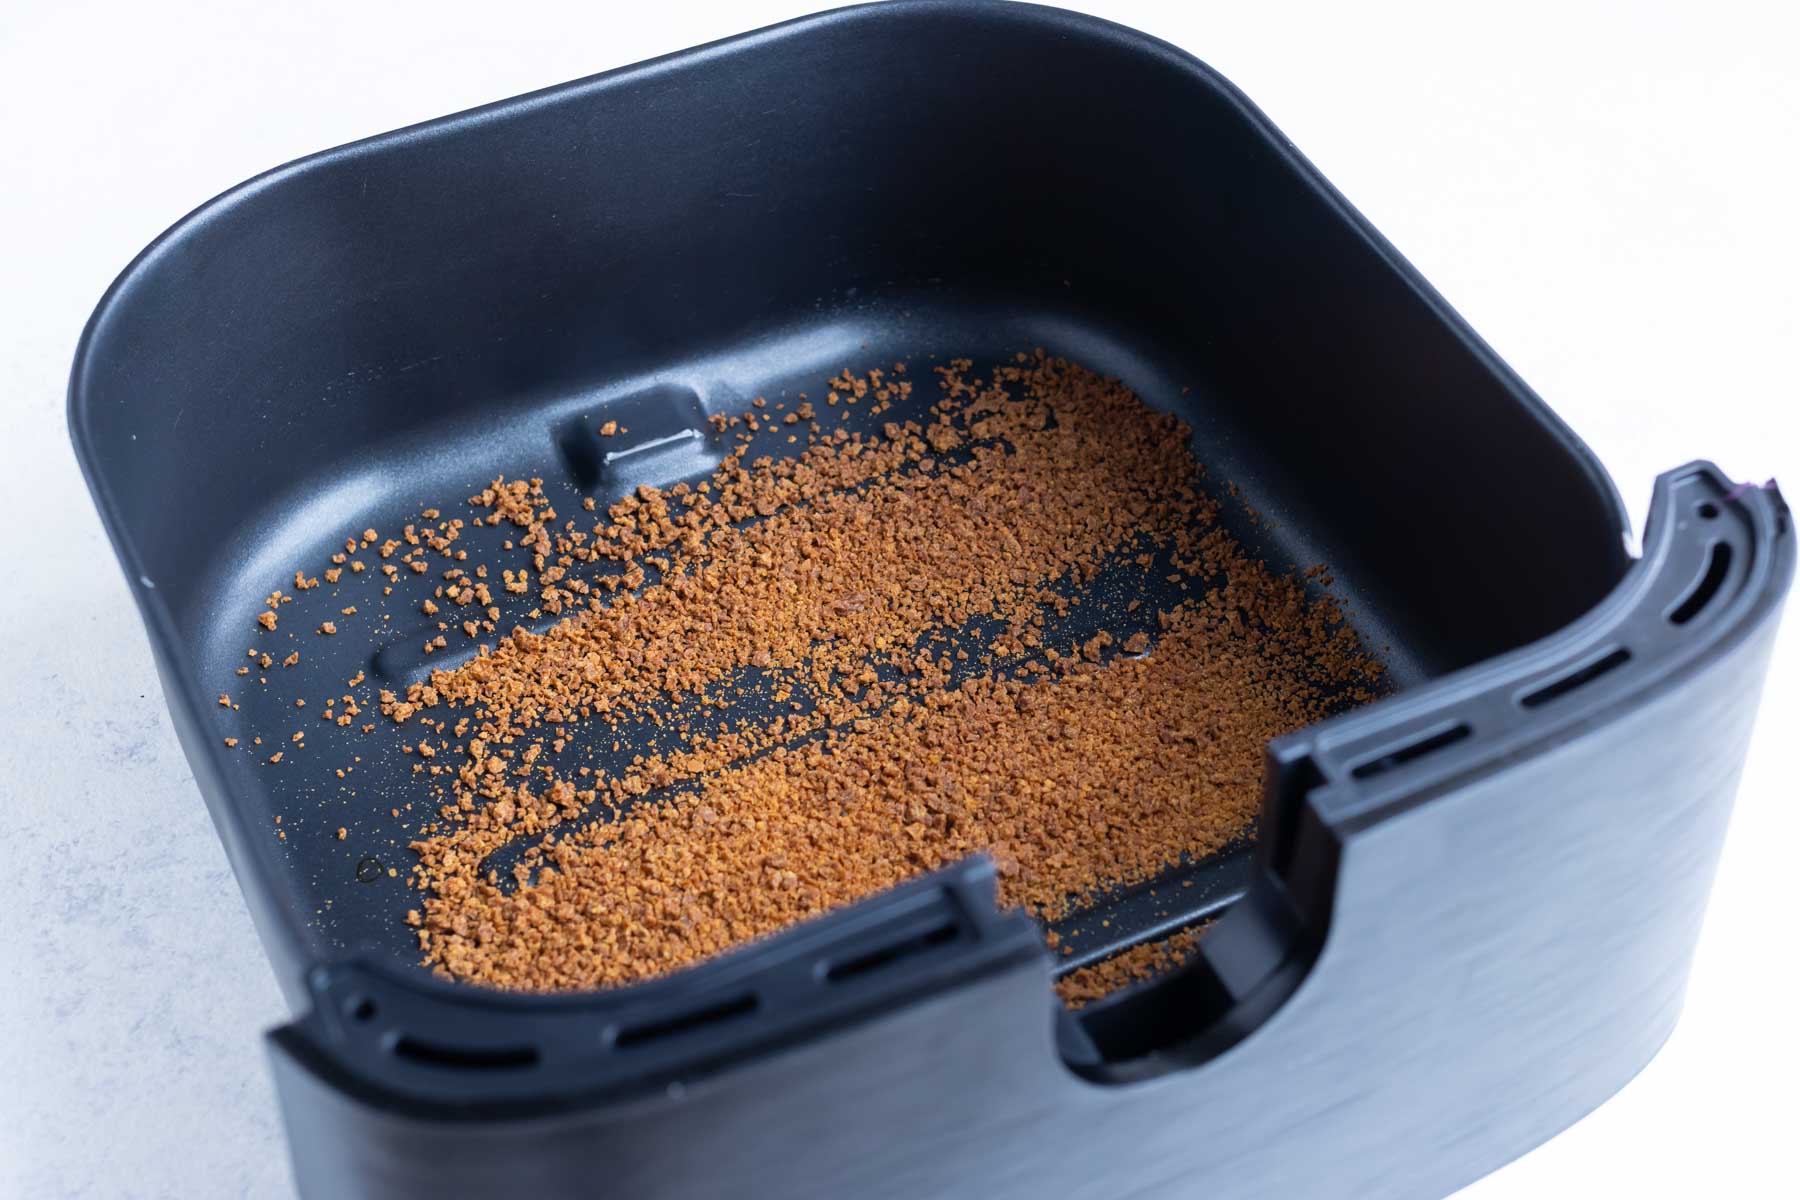 Leftover crumbs at the bottom of your air fryer basket.